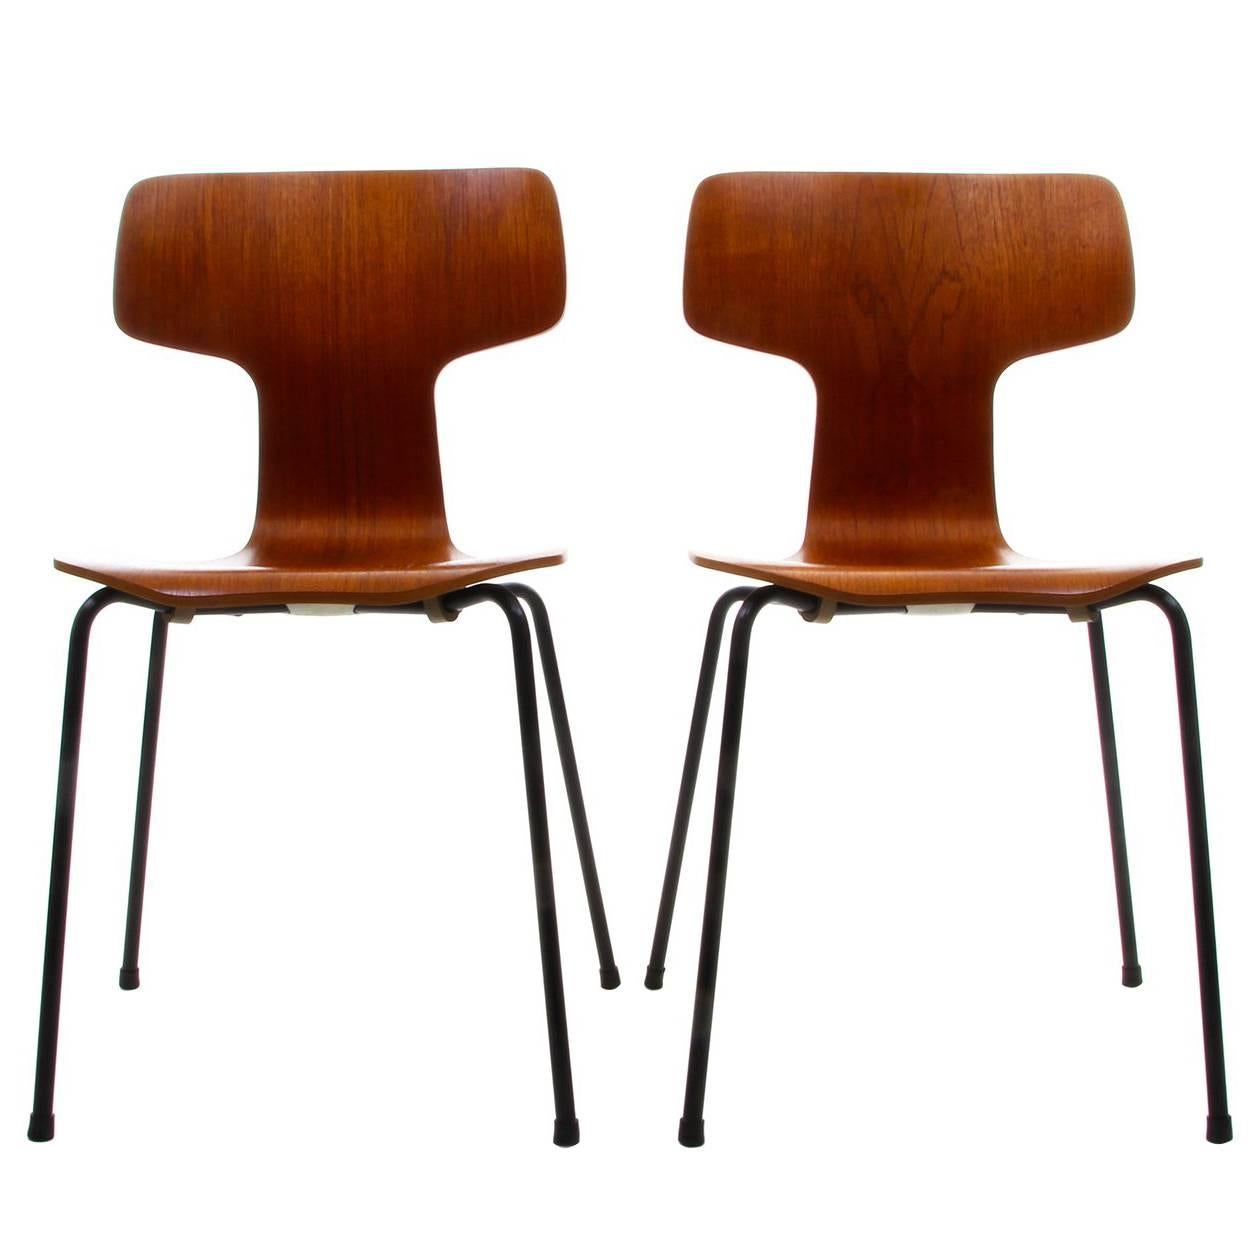 Two Teak T-Chairs, Model 3103 Dining Chairs by Arne Jacobsen, Fritz Hansen, 1955 For Sale